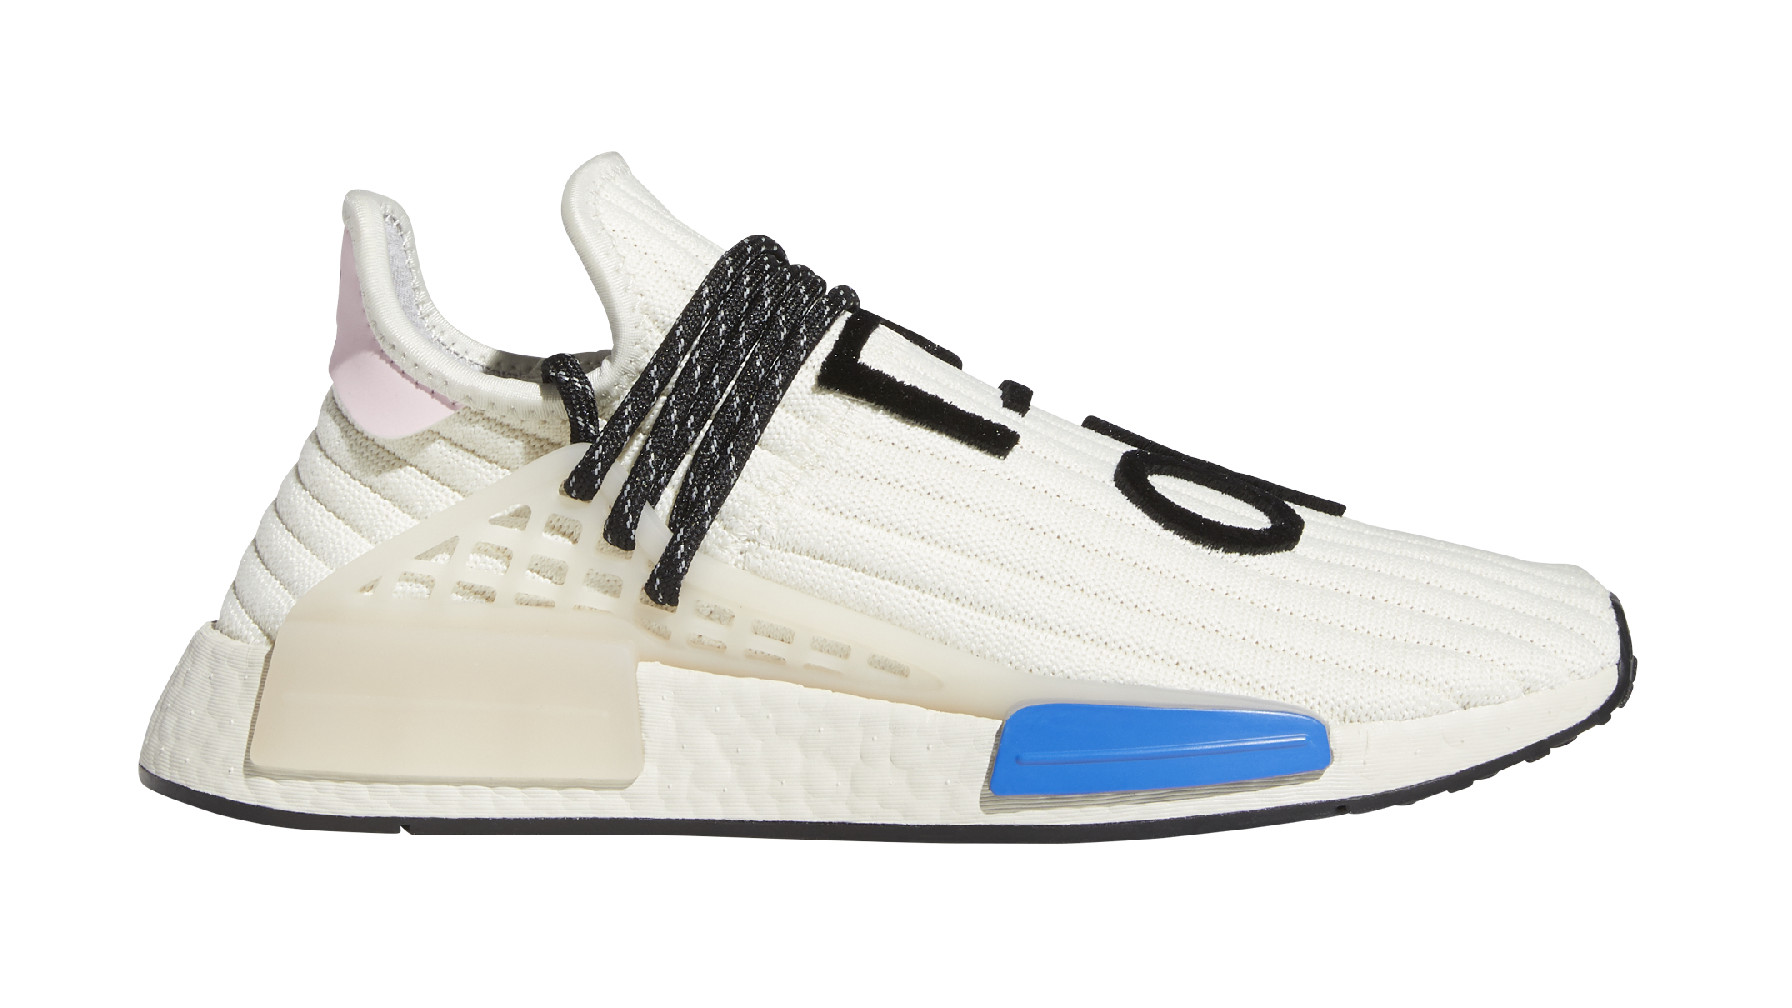 New Pharrell X Adidas Nmd Hu Colorway Releasing This Week | Complex